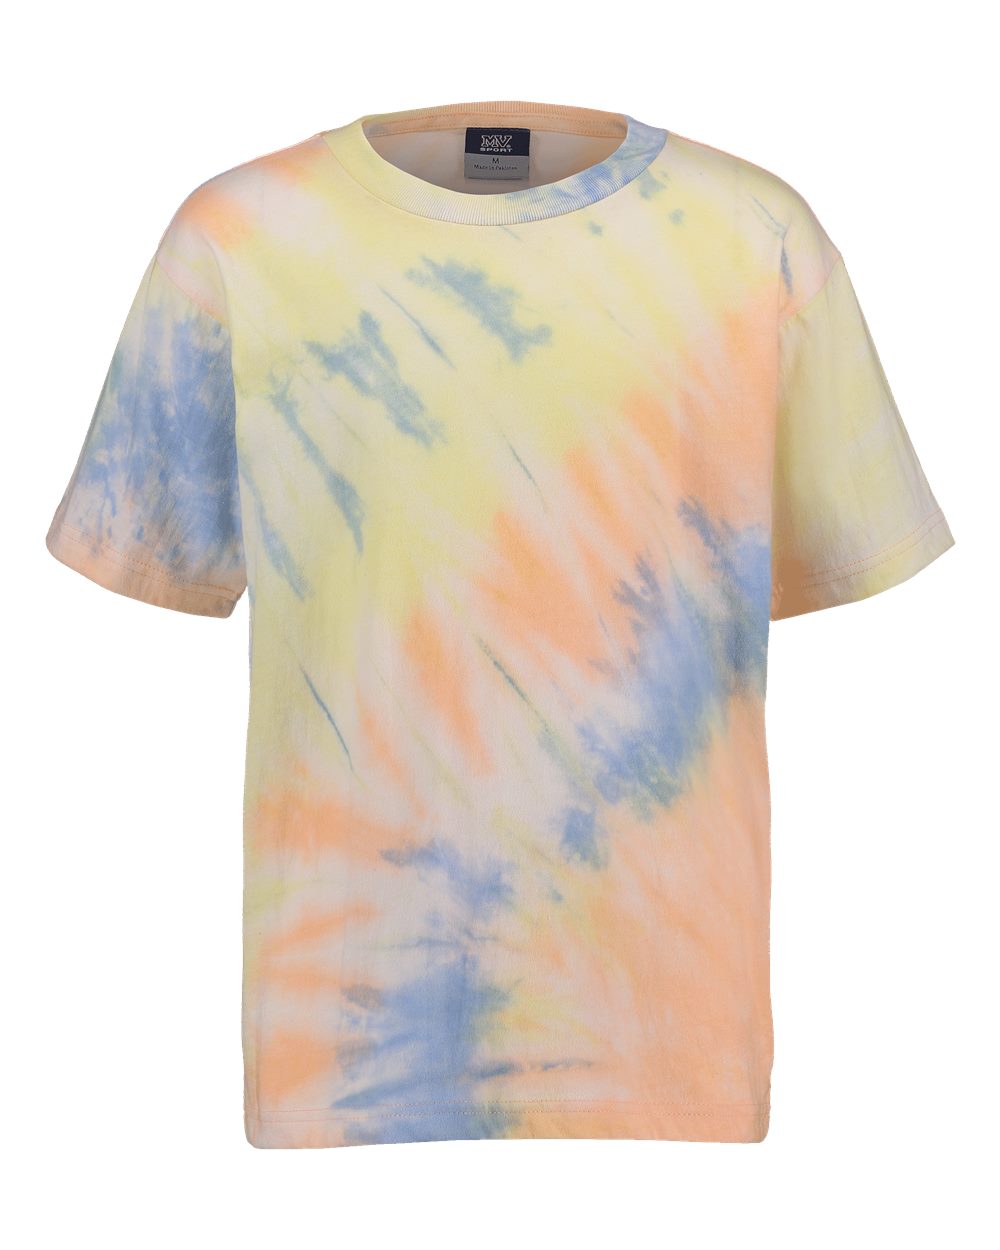 click to view Sunrise Tie Dye